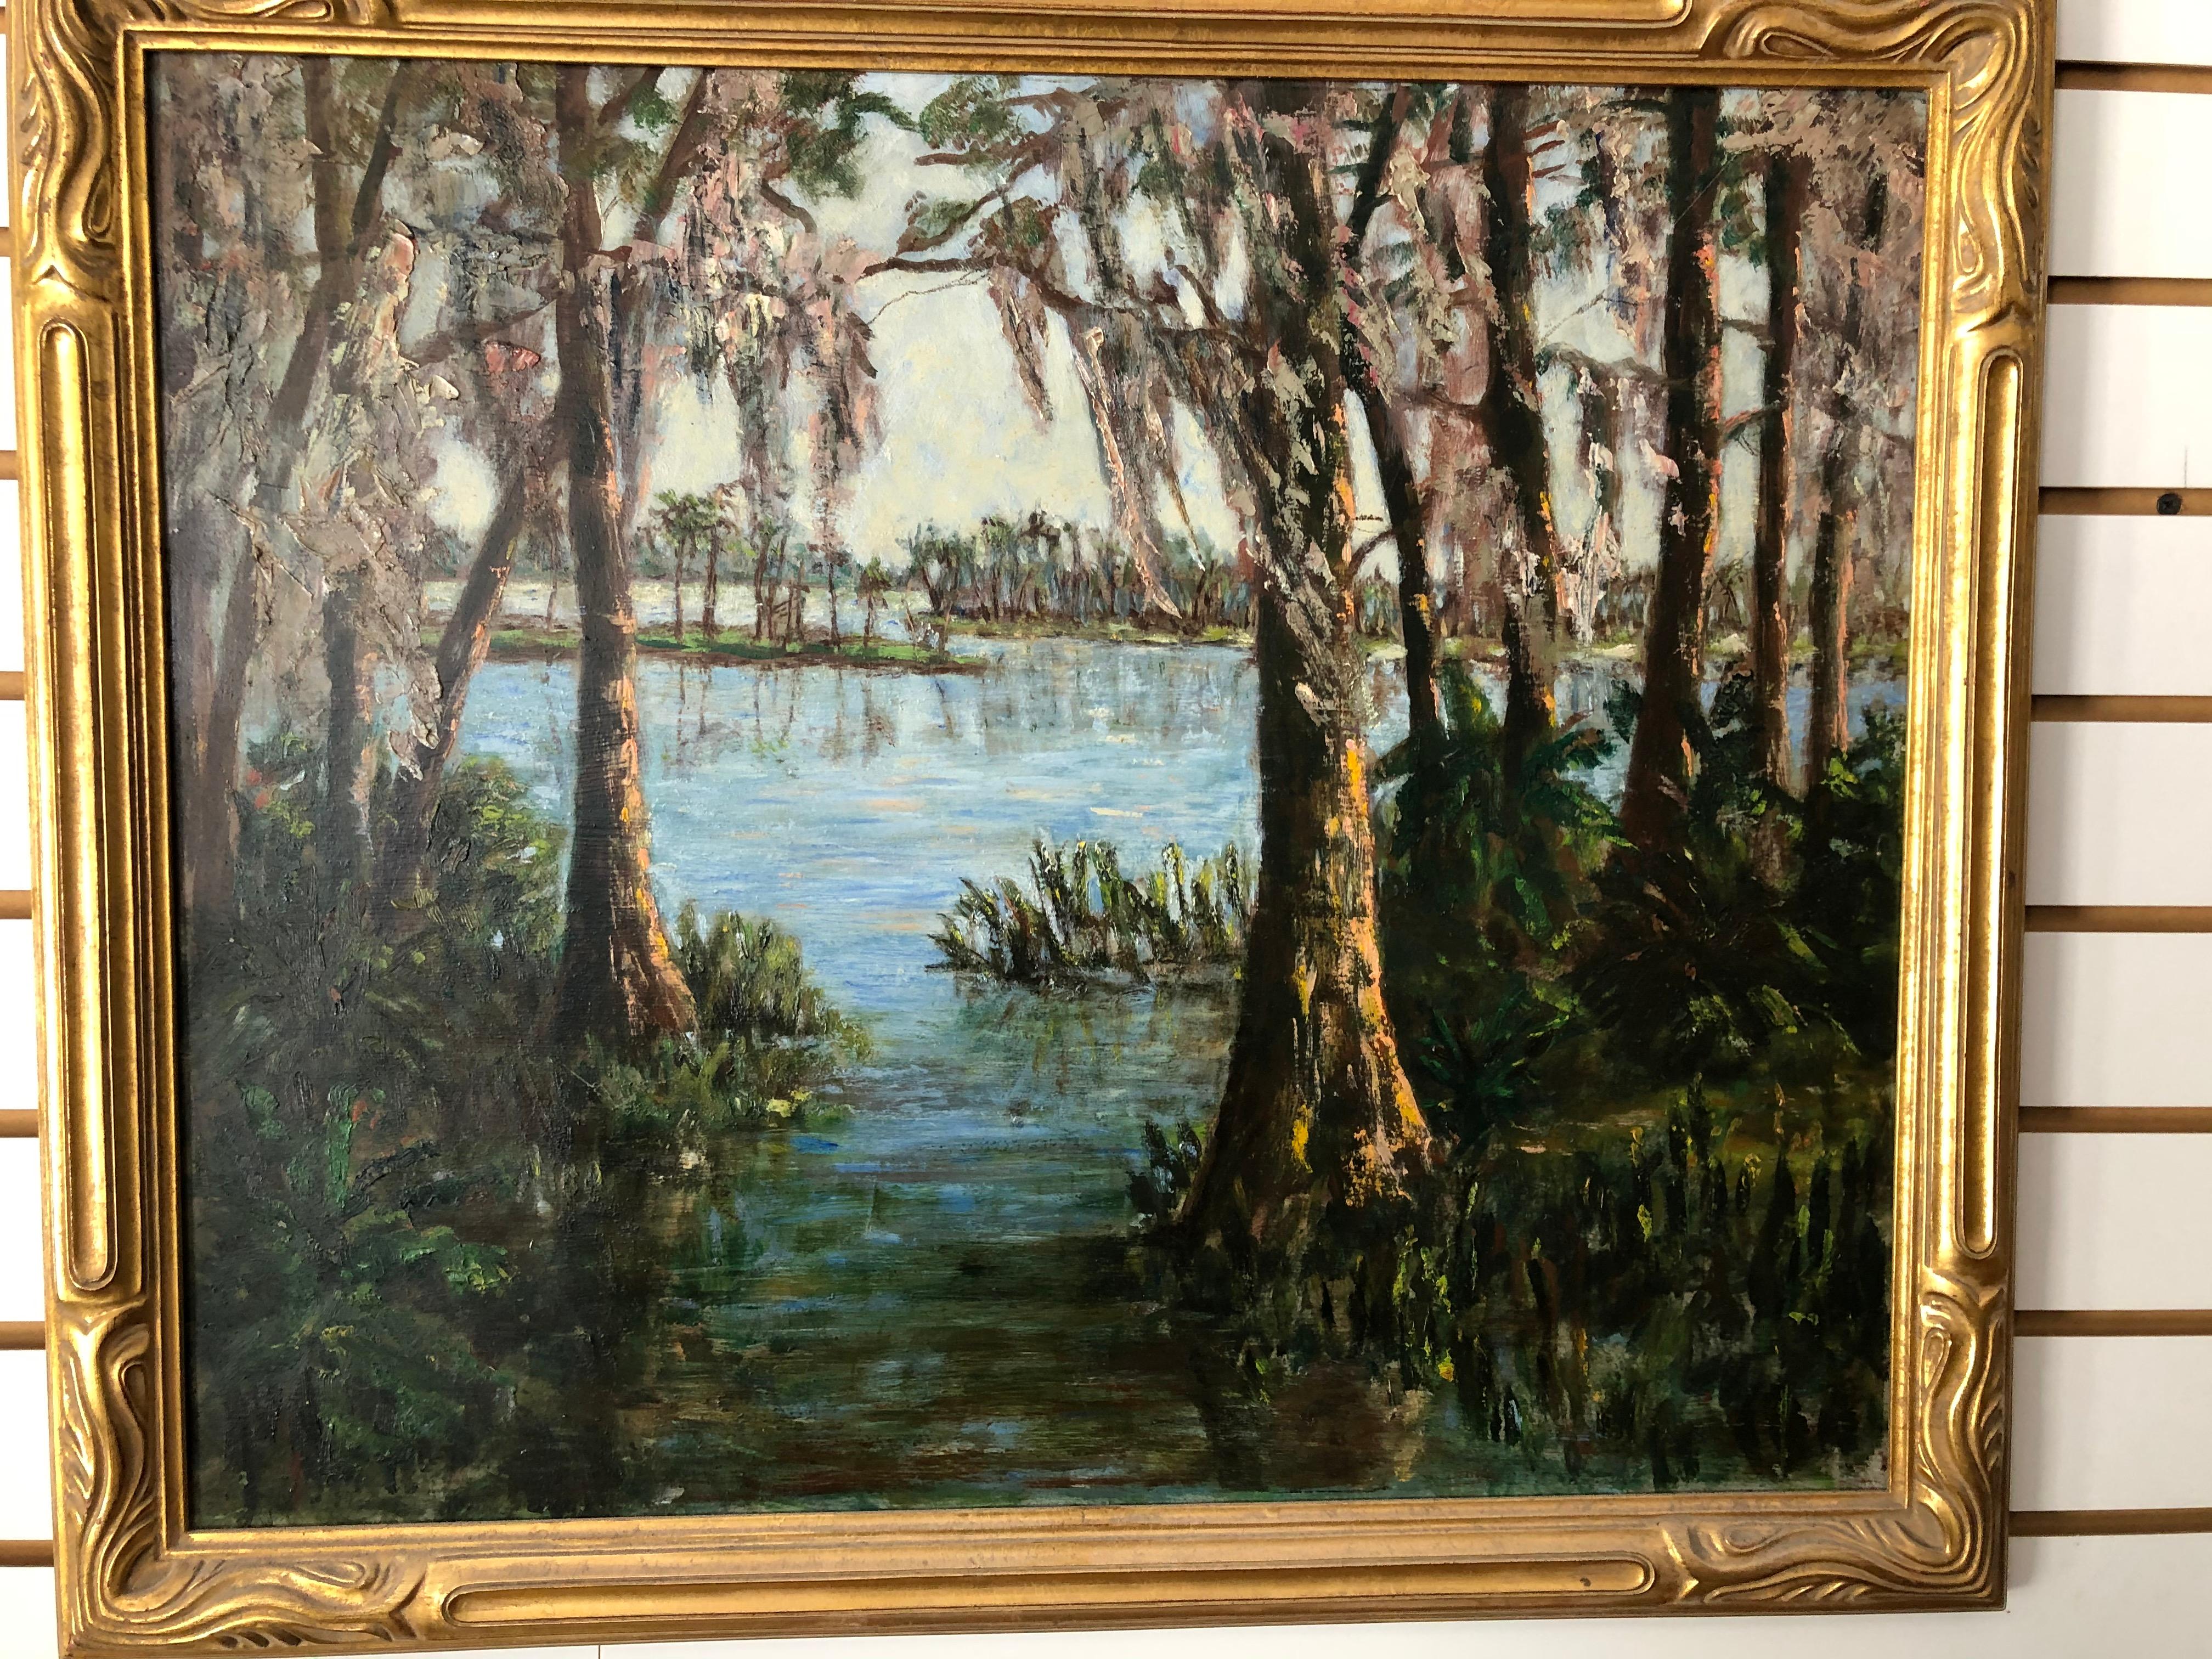 Unknown Landscape Painting - Attributed to May Spear Clinedinst  Old Florida Swamp Scene